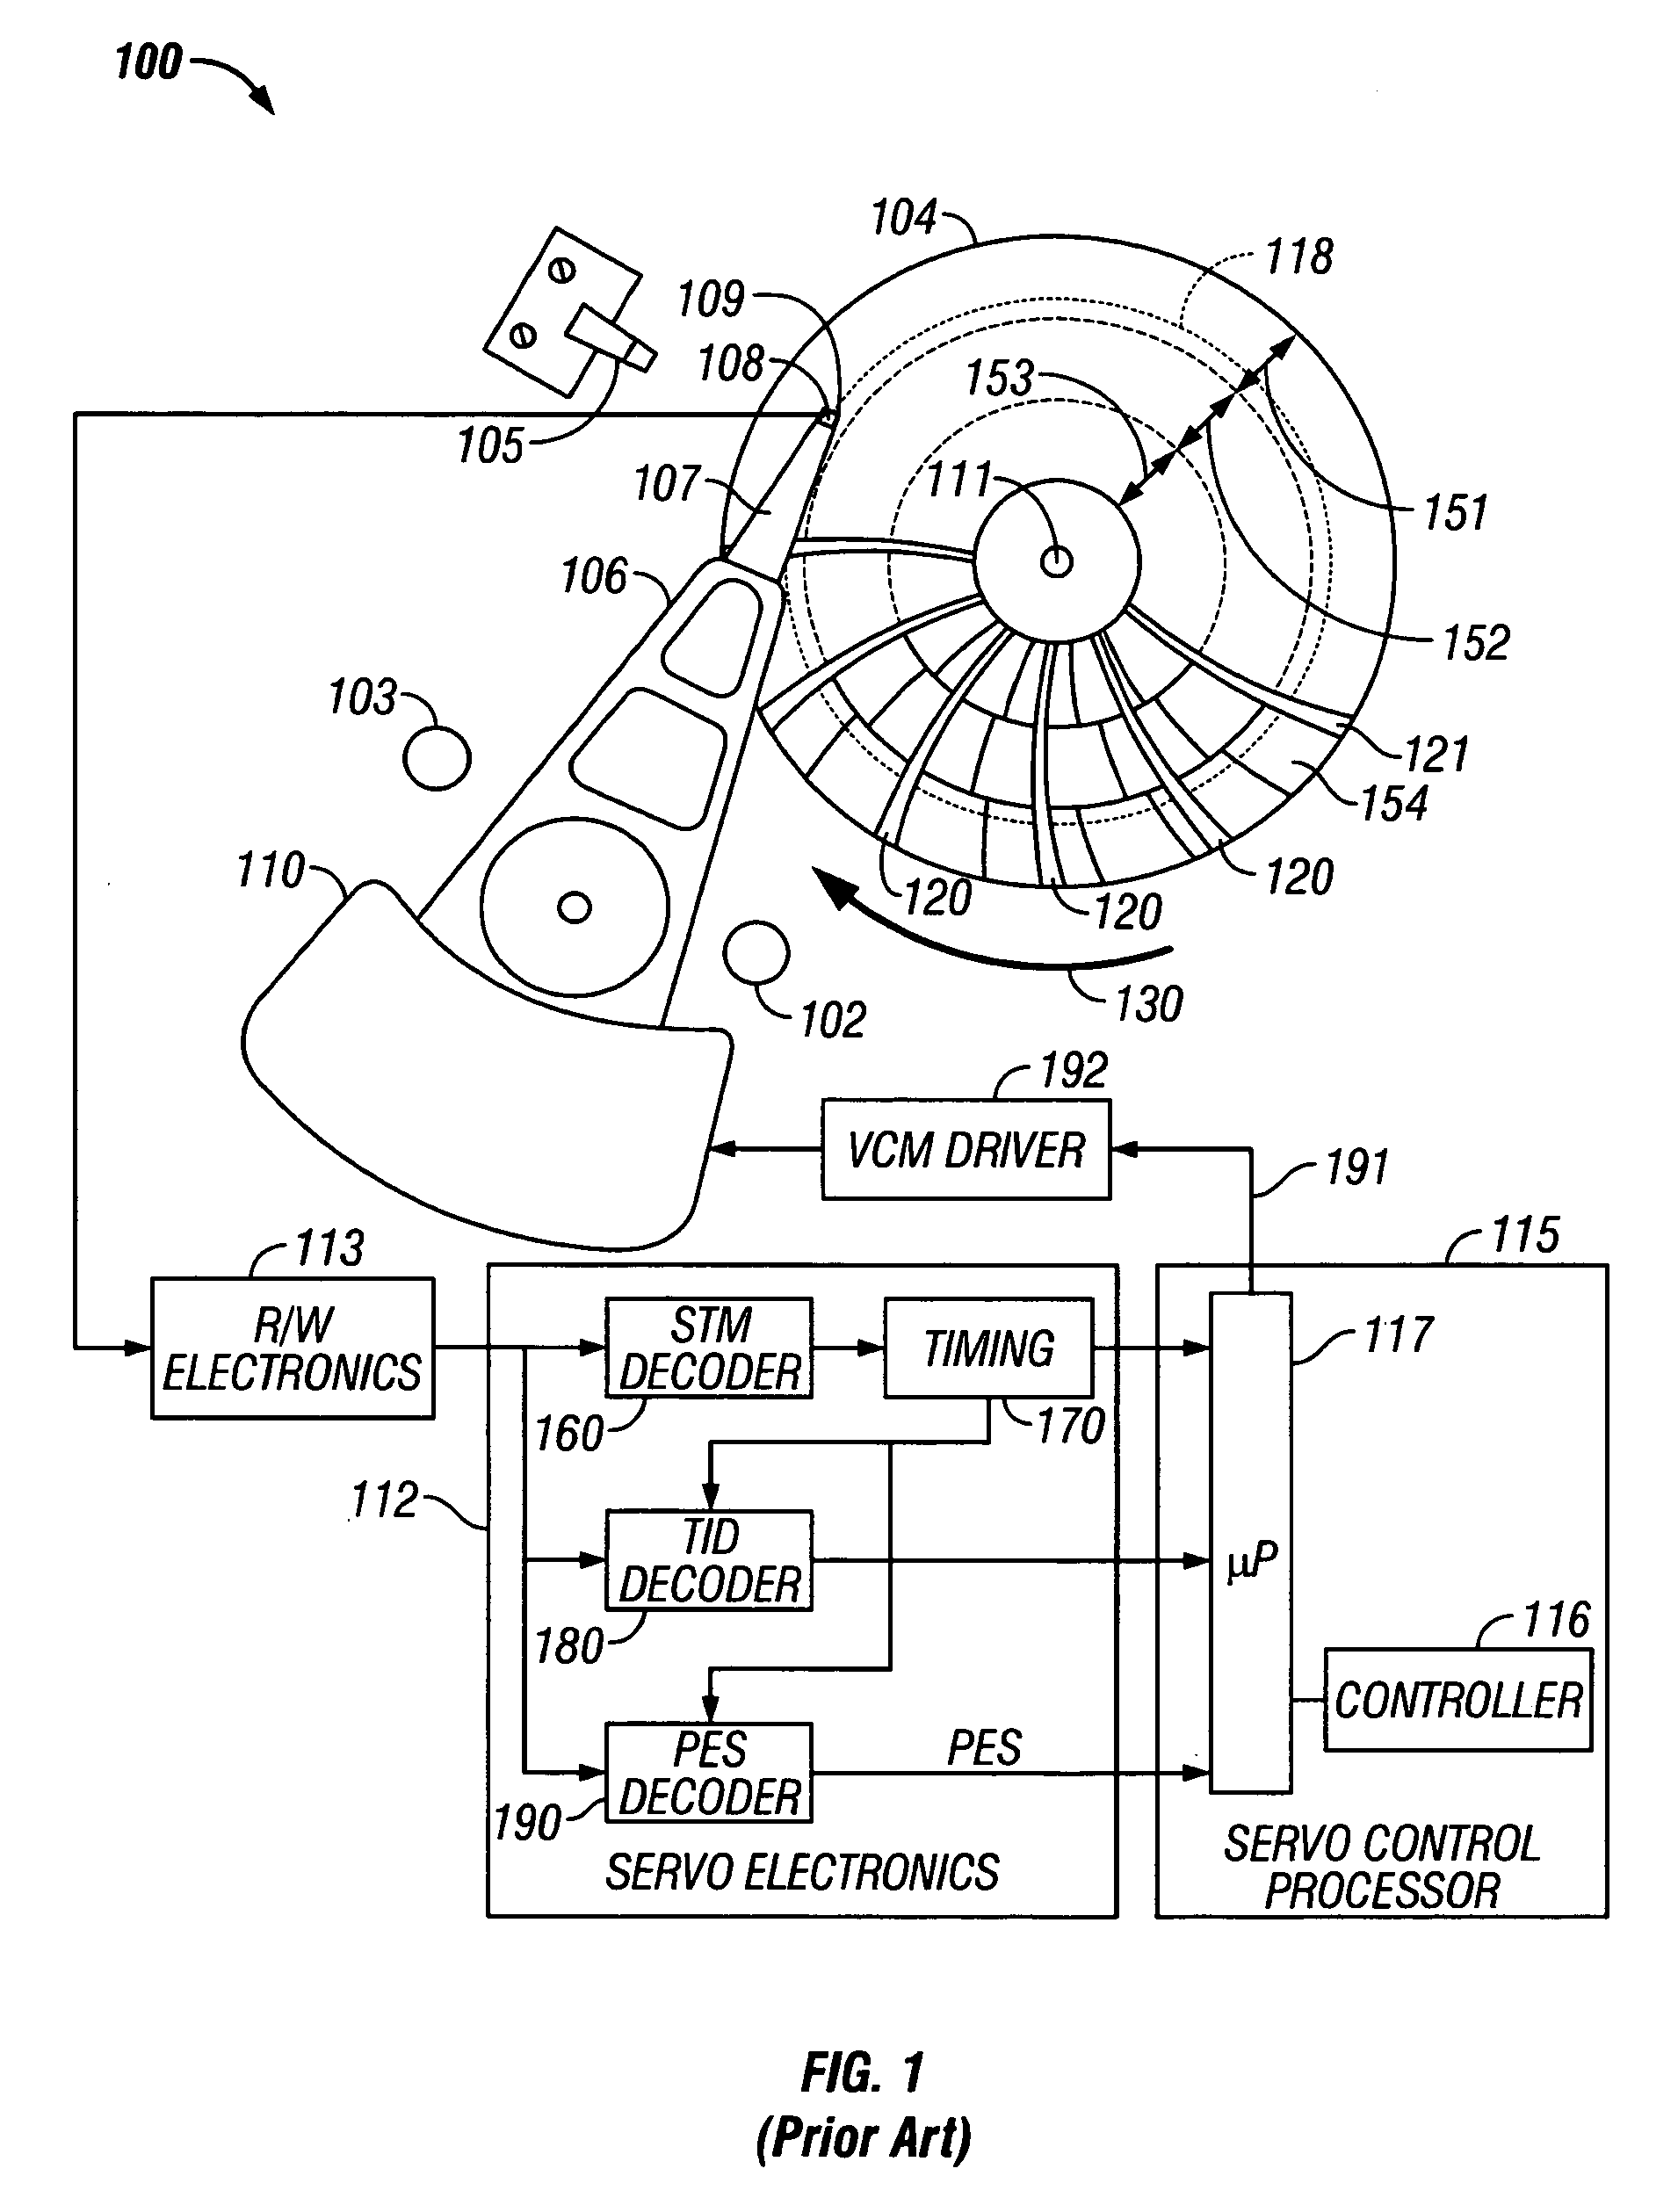 Dual-stage actuator disk drive with secondary actuator failure detection and recovery using relative-position signal